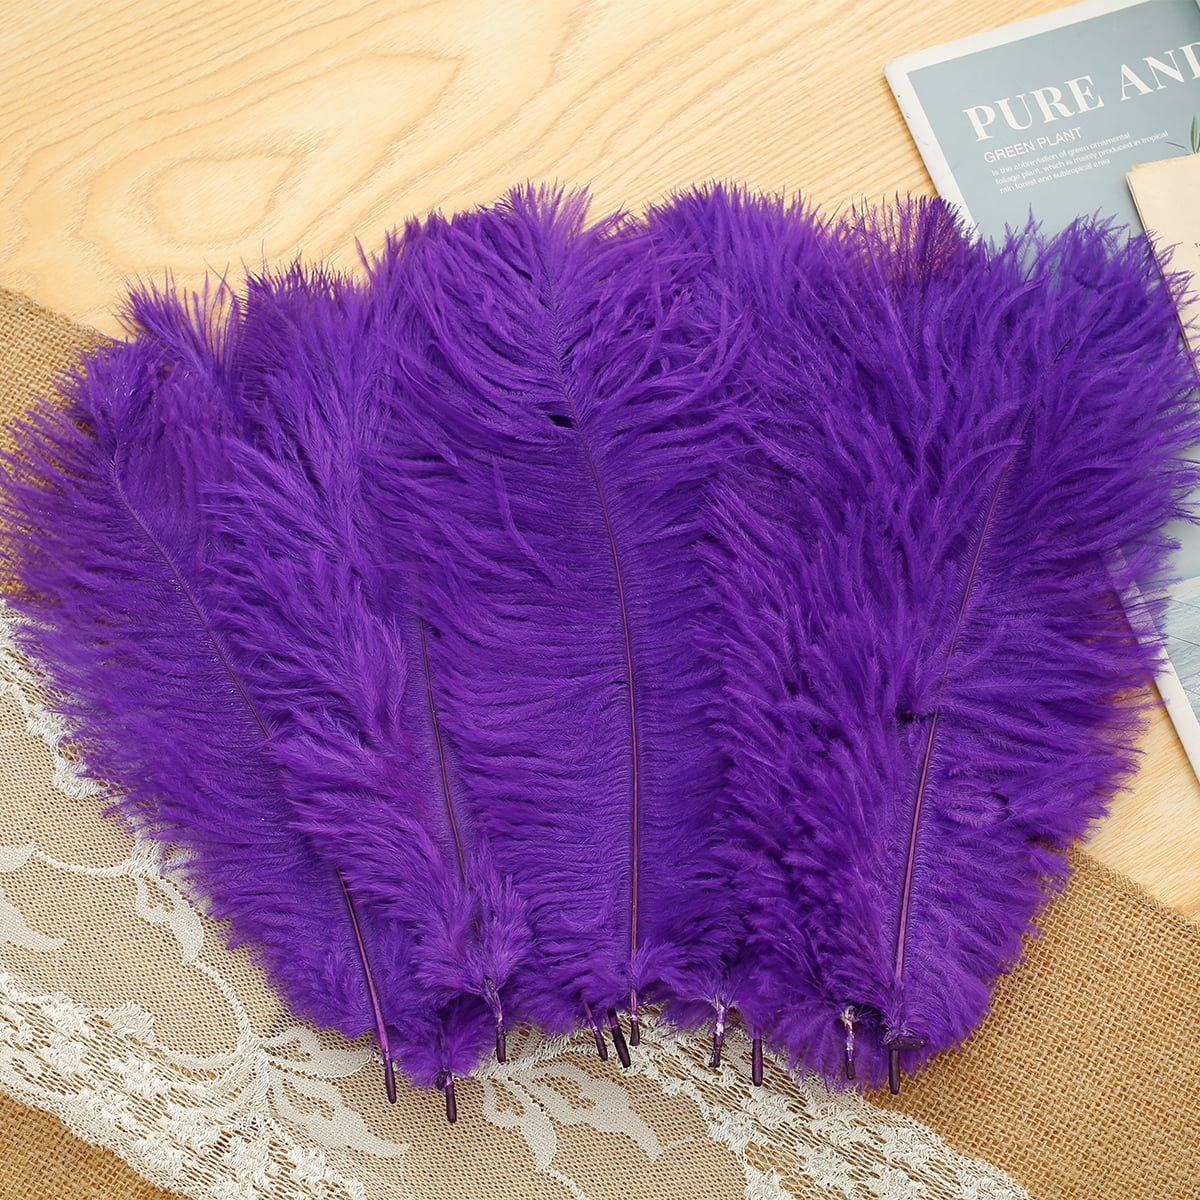 Mardi Gras Natural Green Gold Purple Ostrich Feathers Decorations10-12inch for Wedding Party Centerpieces,Flower Arrangement and Home Decoration